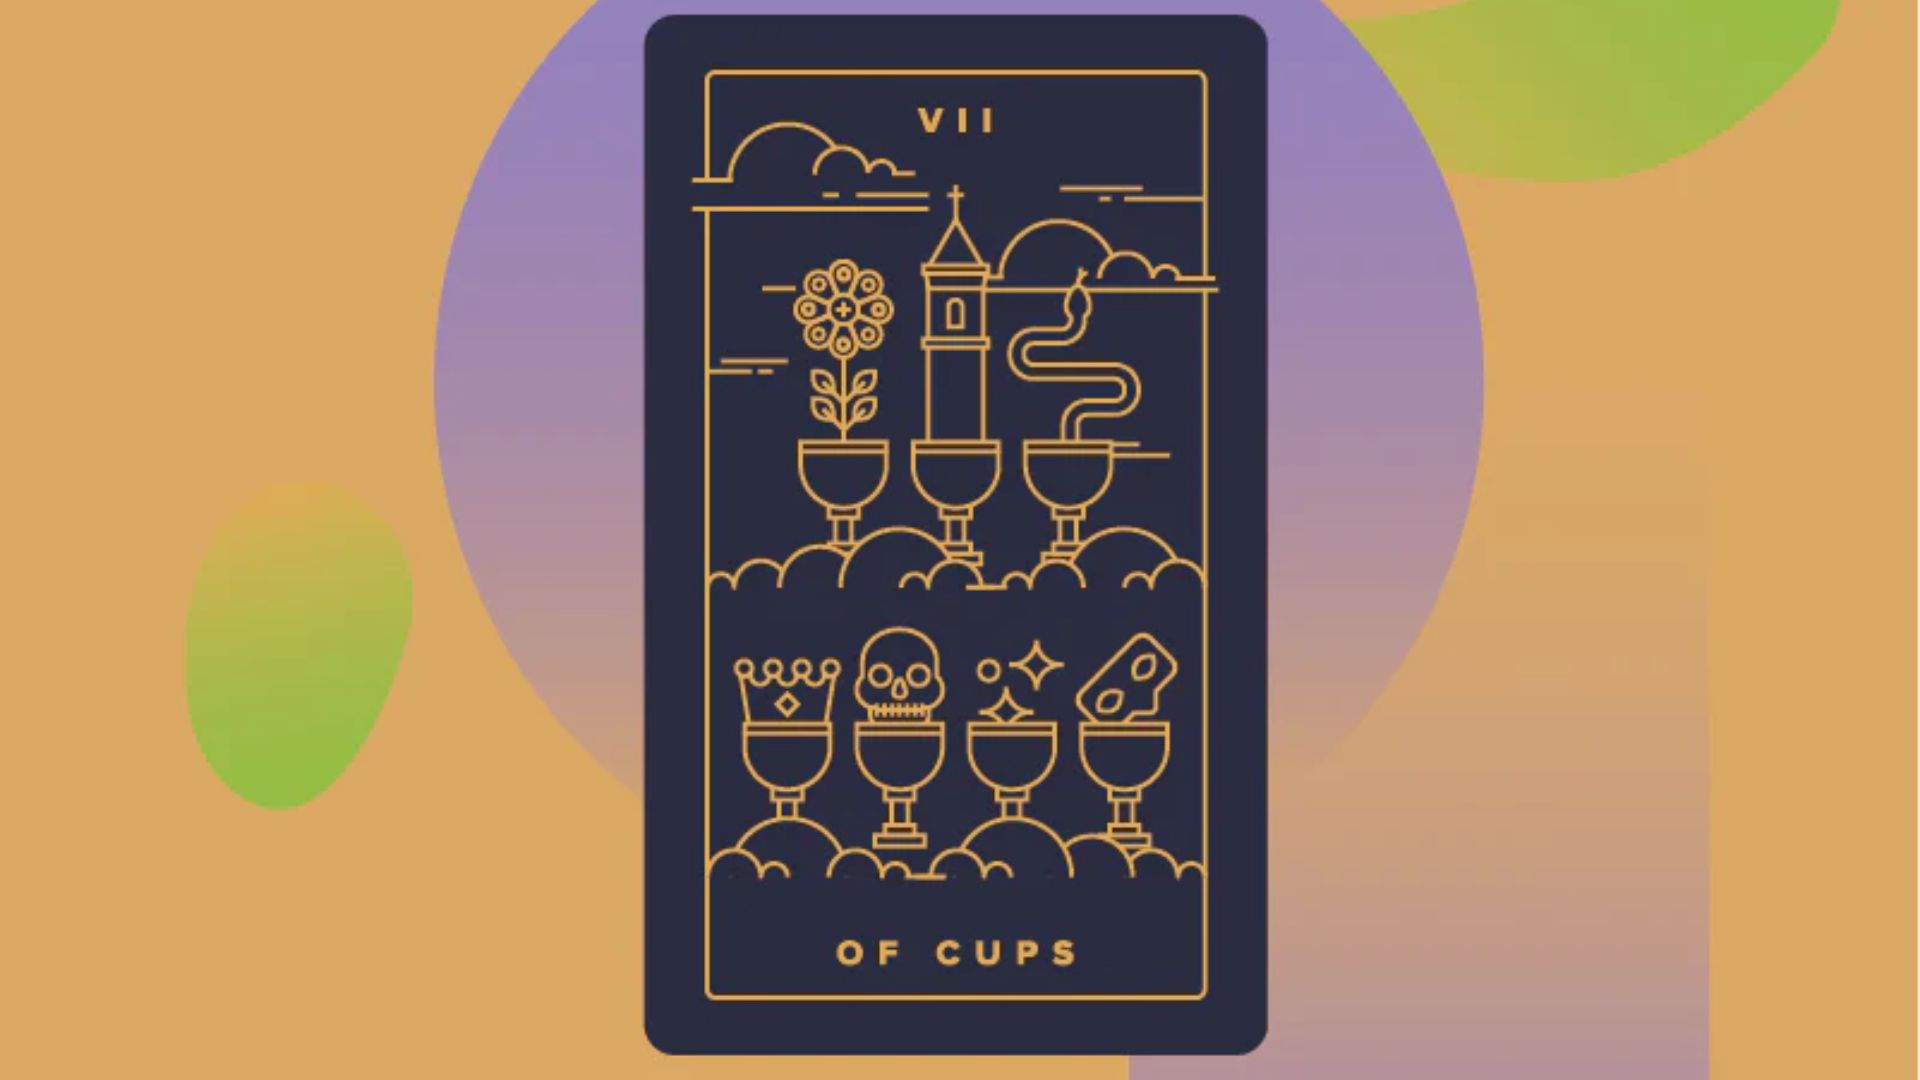 7 Of Cups - Maximizing Financial Decisions